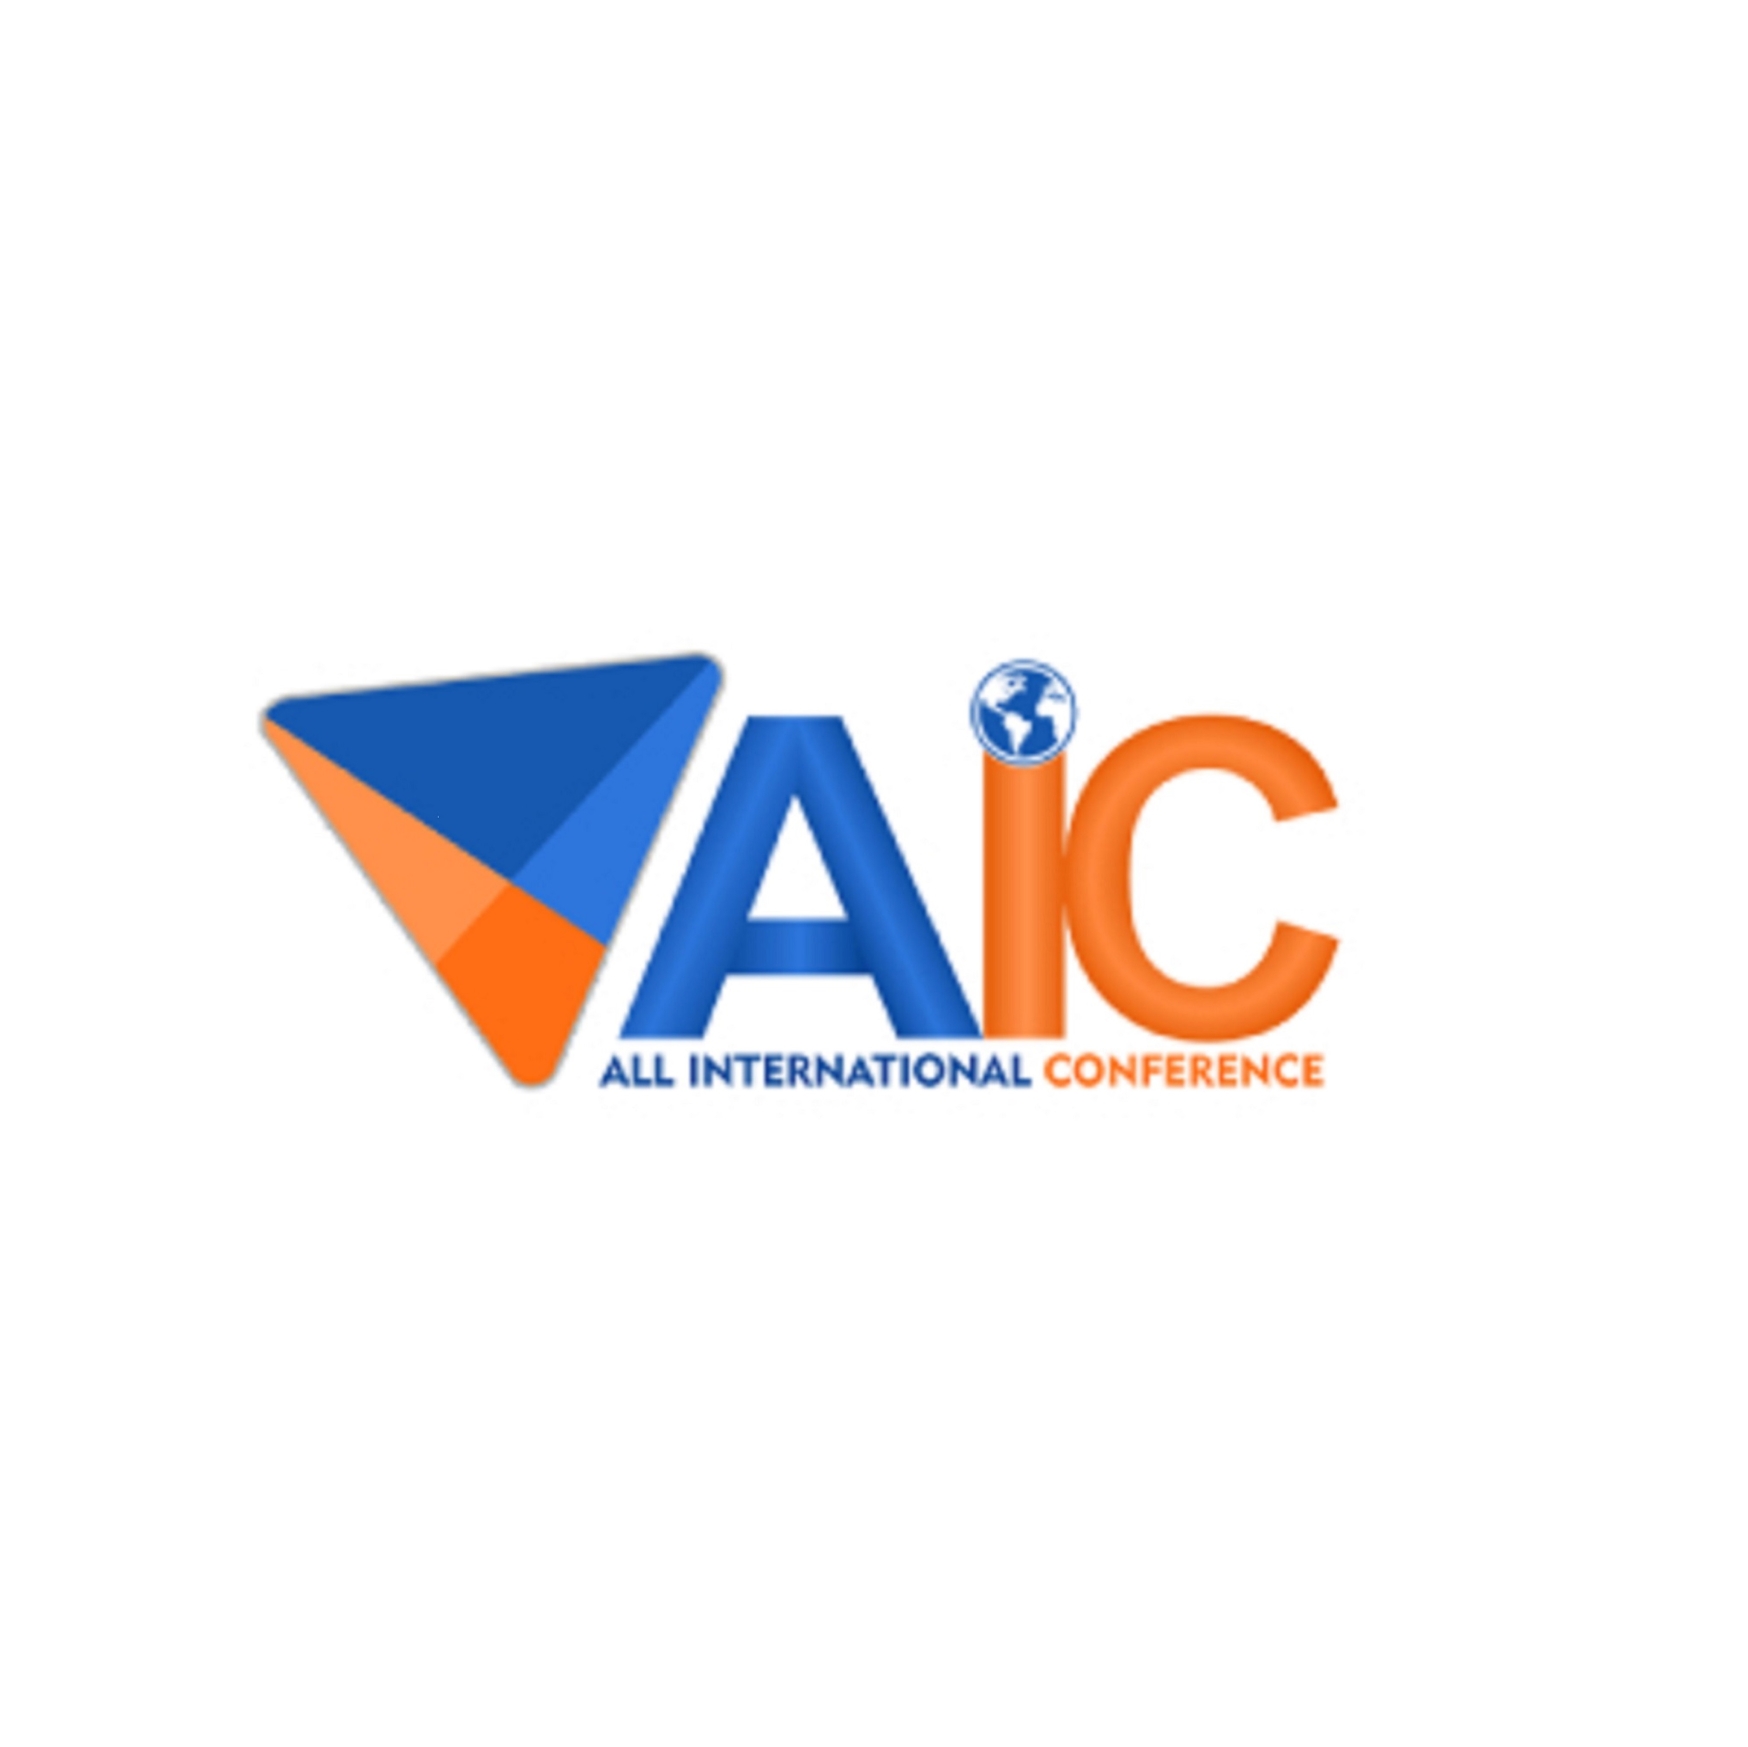 All International Conference 